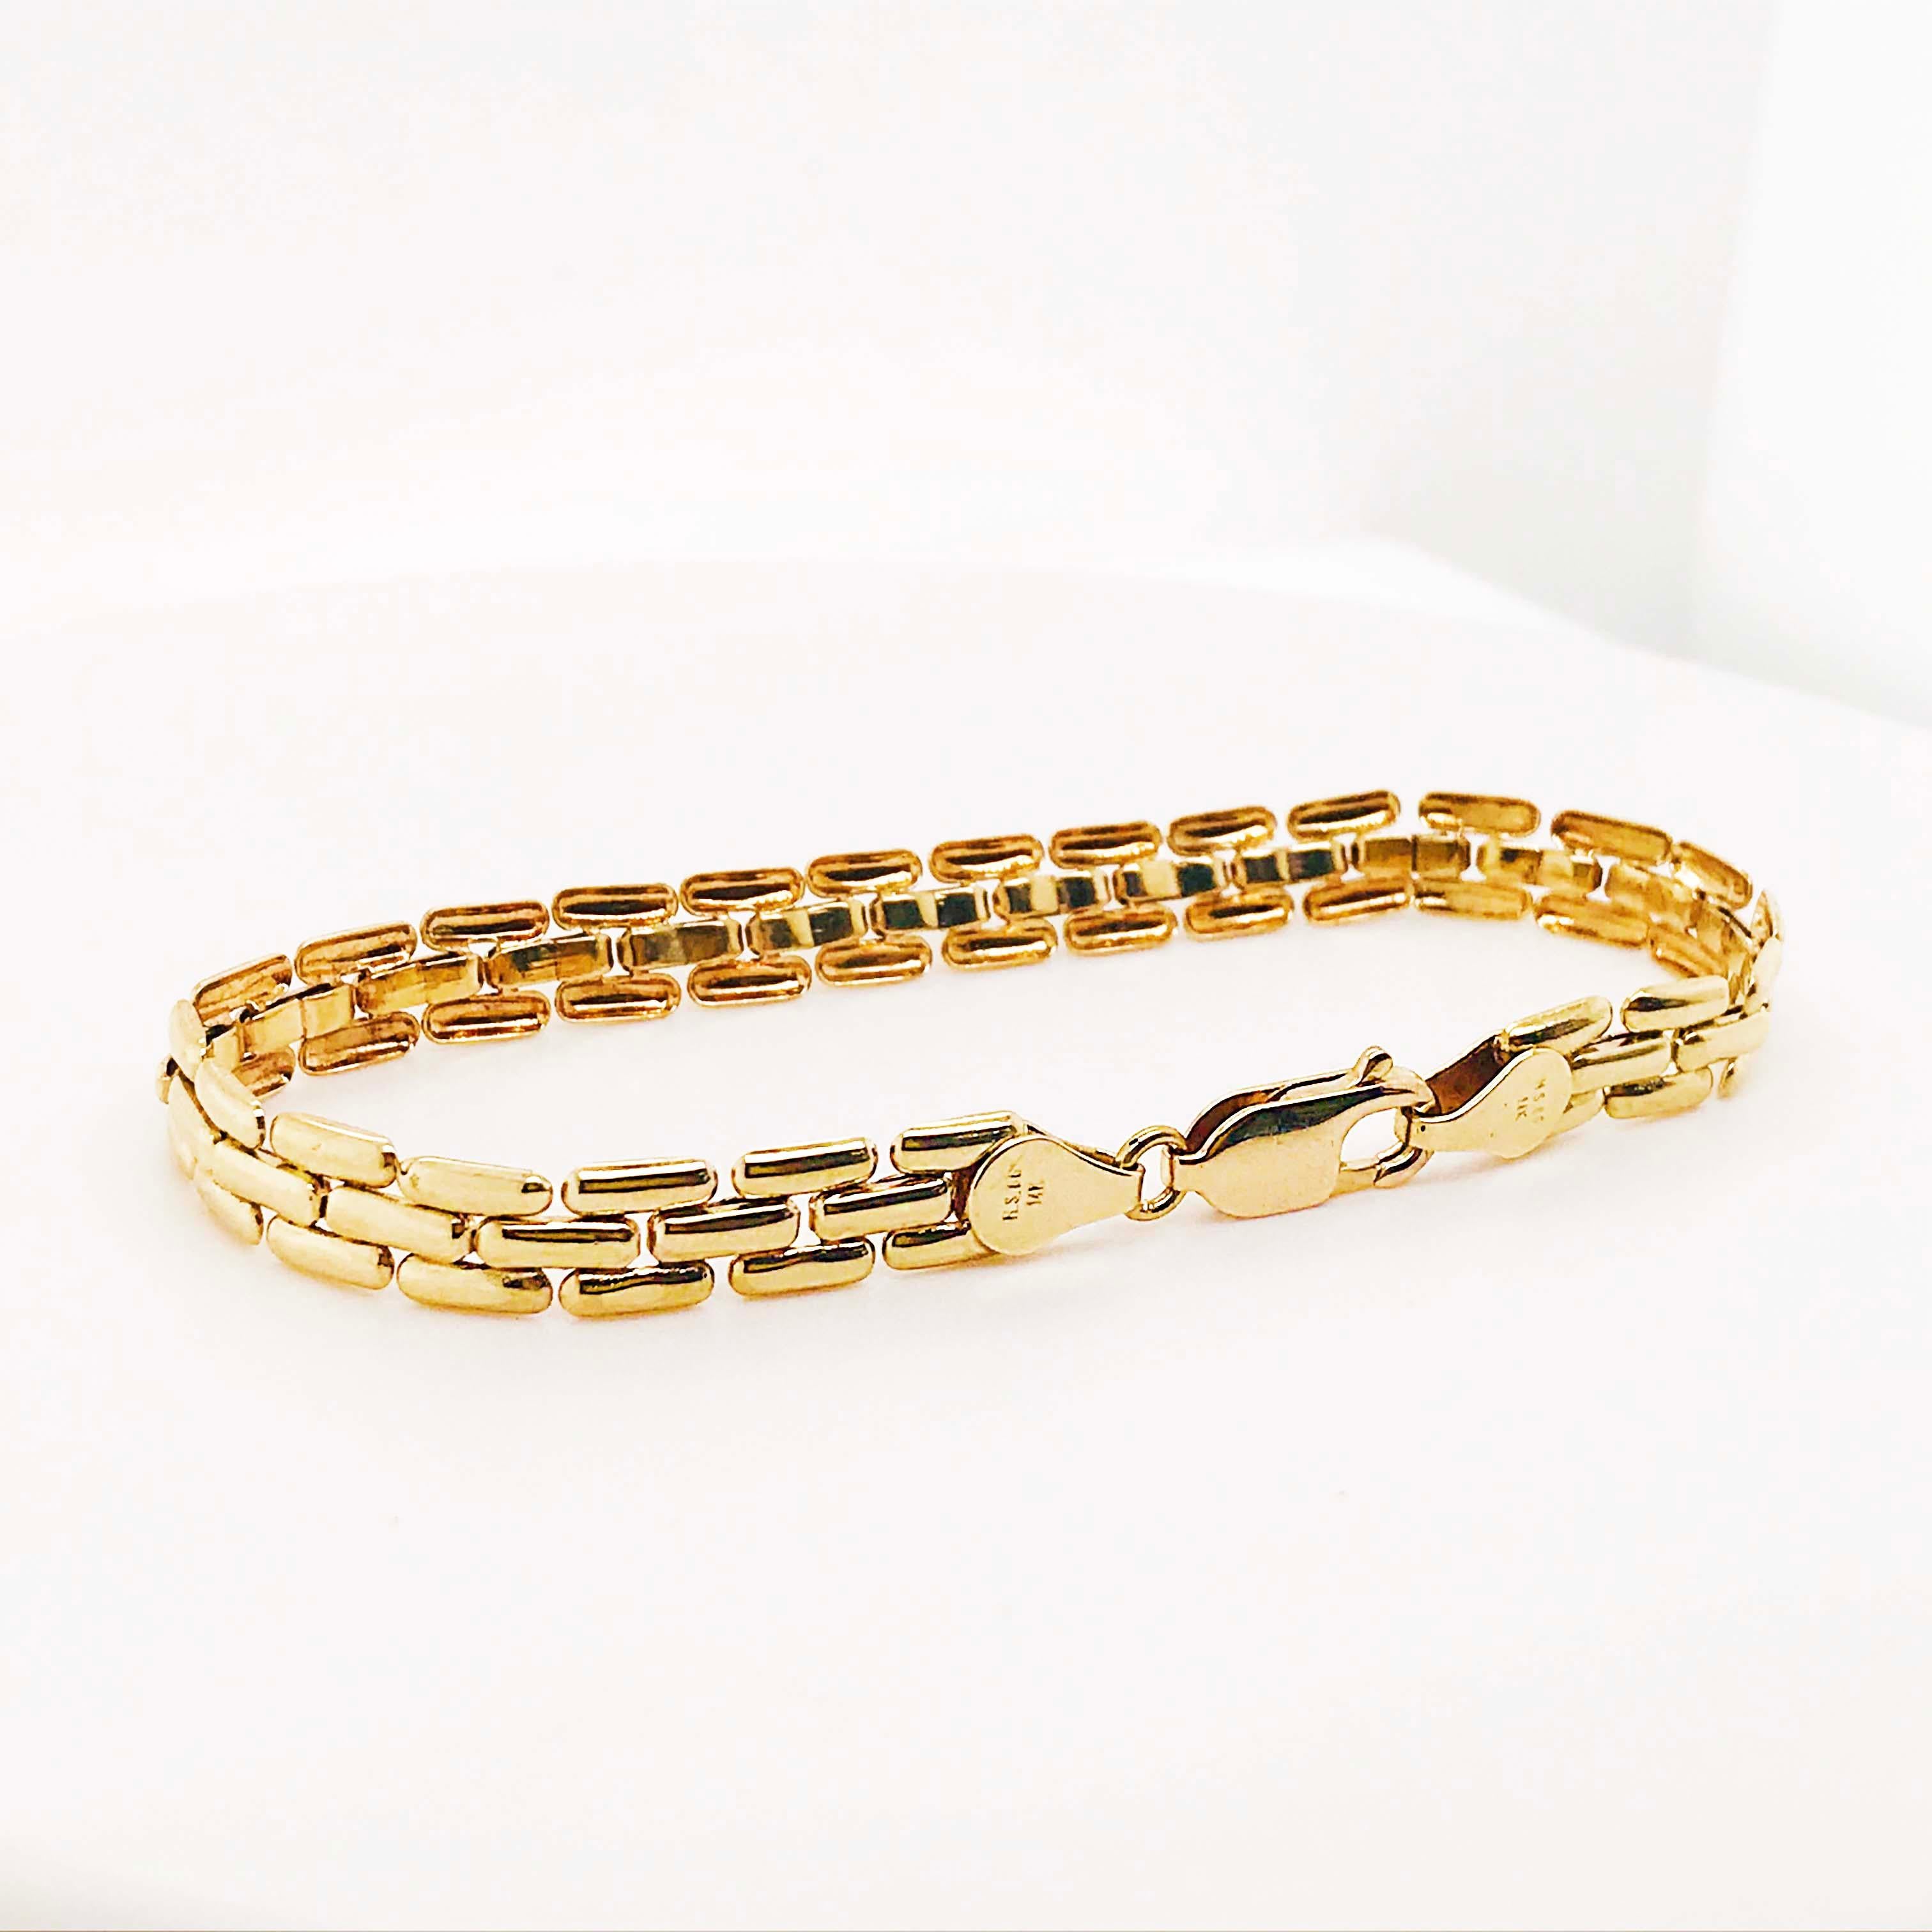 Gold Panther Chain Bracelet with Large Lobster Clasp, 14 Karat Yellow Gold 7